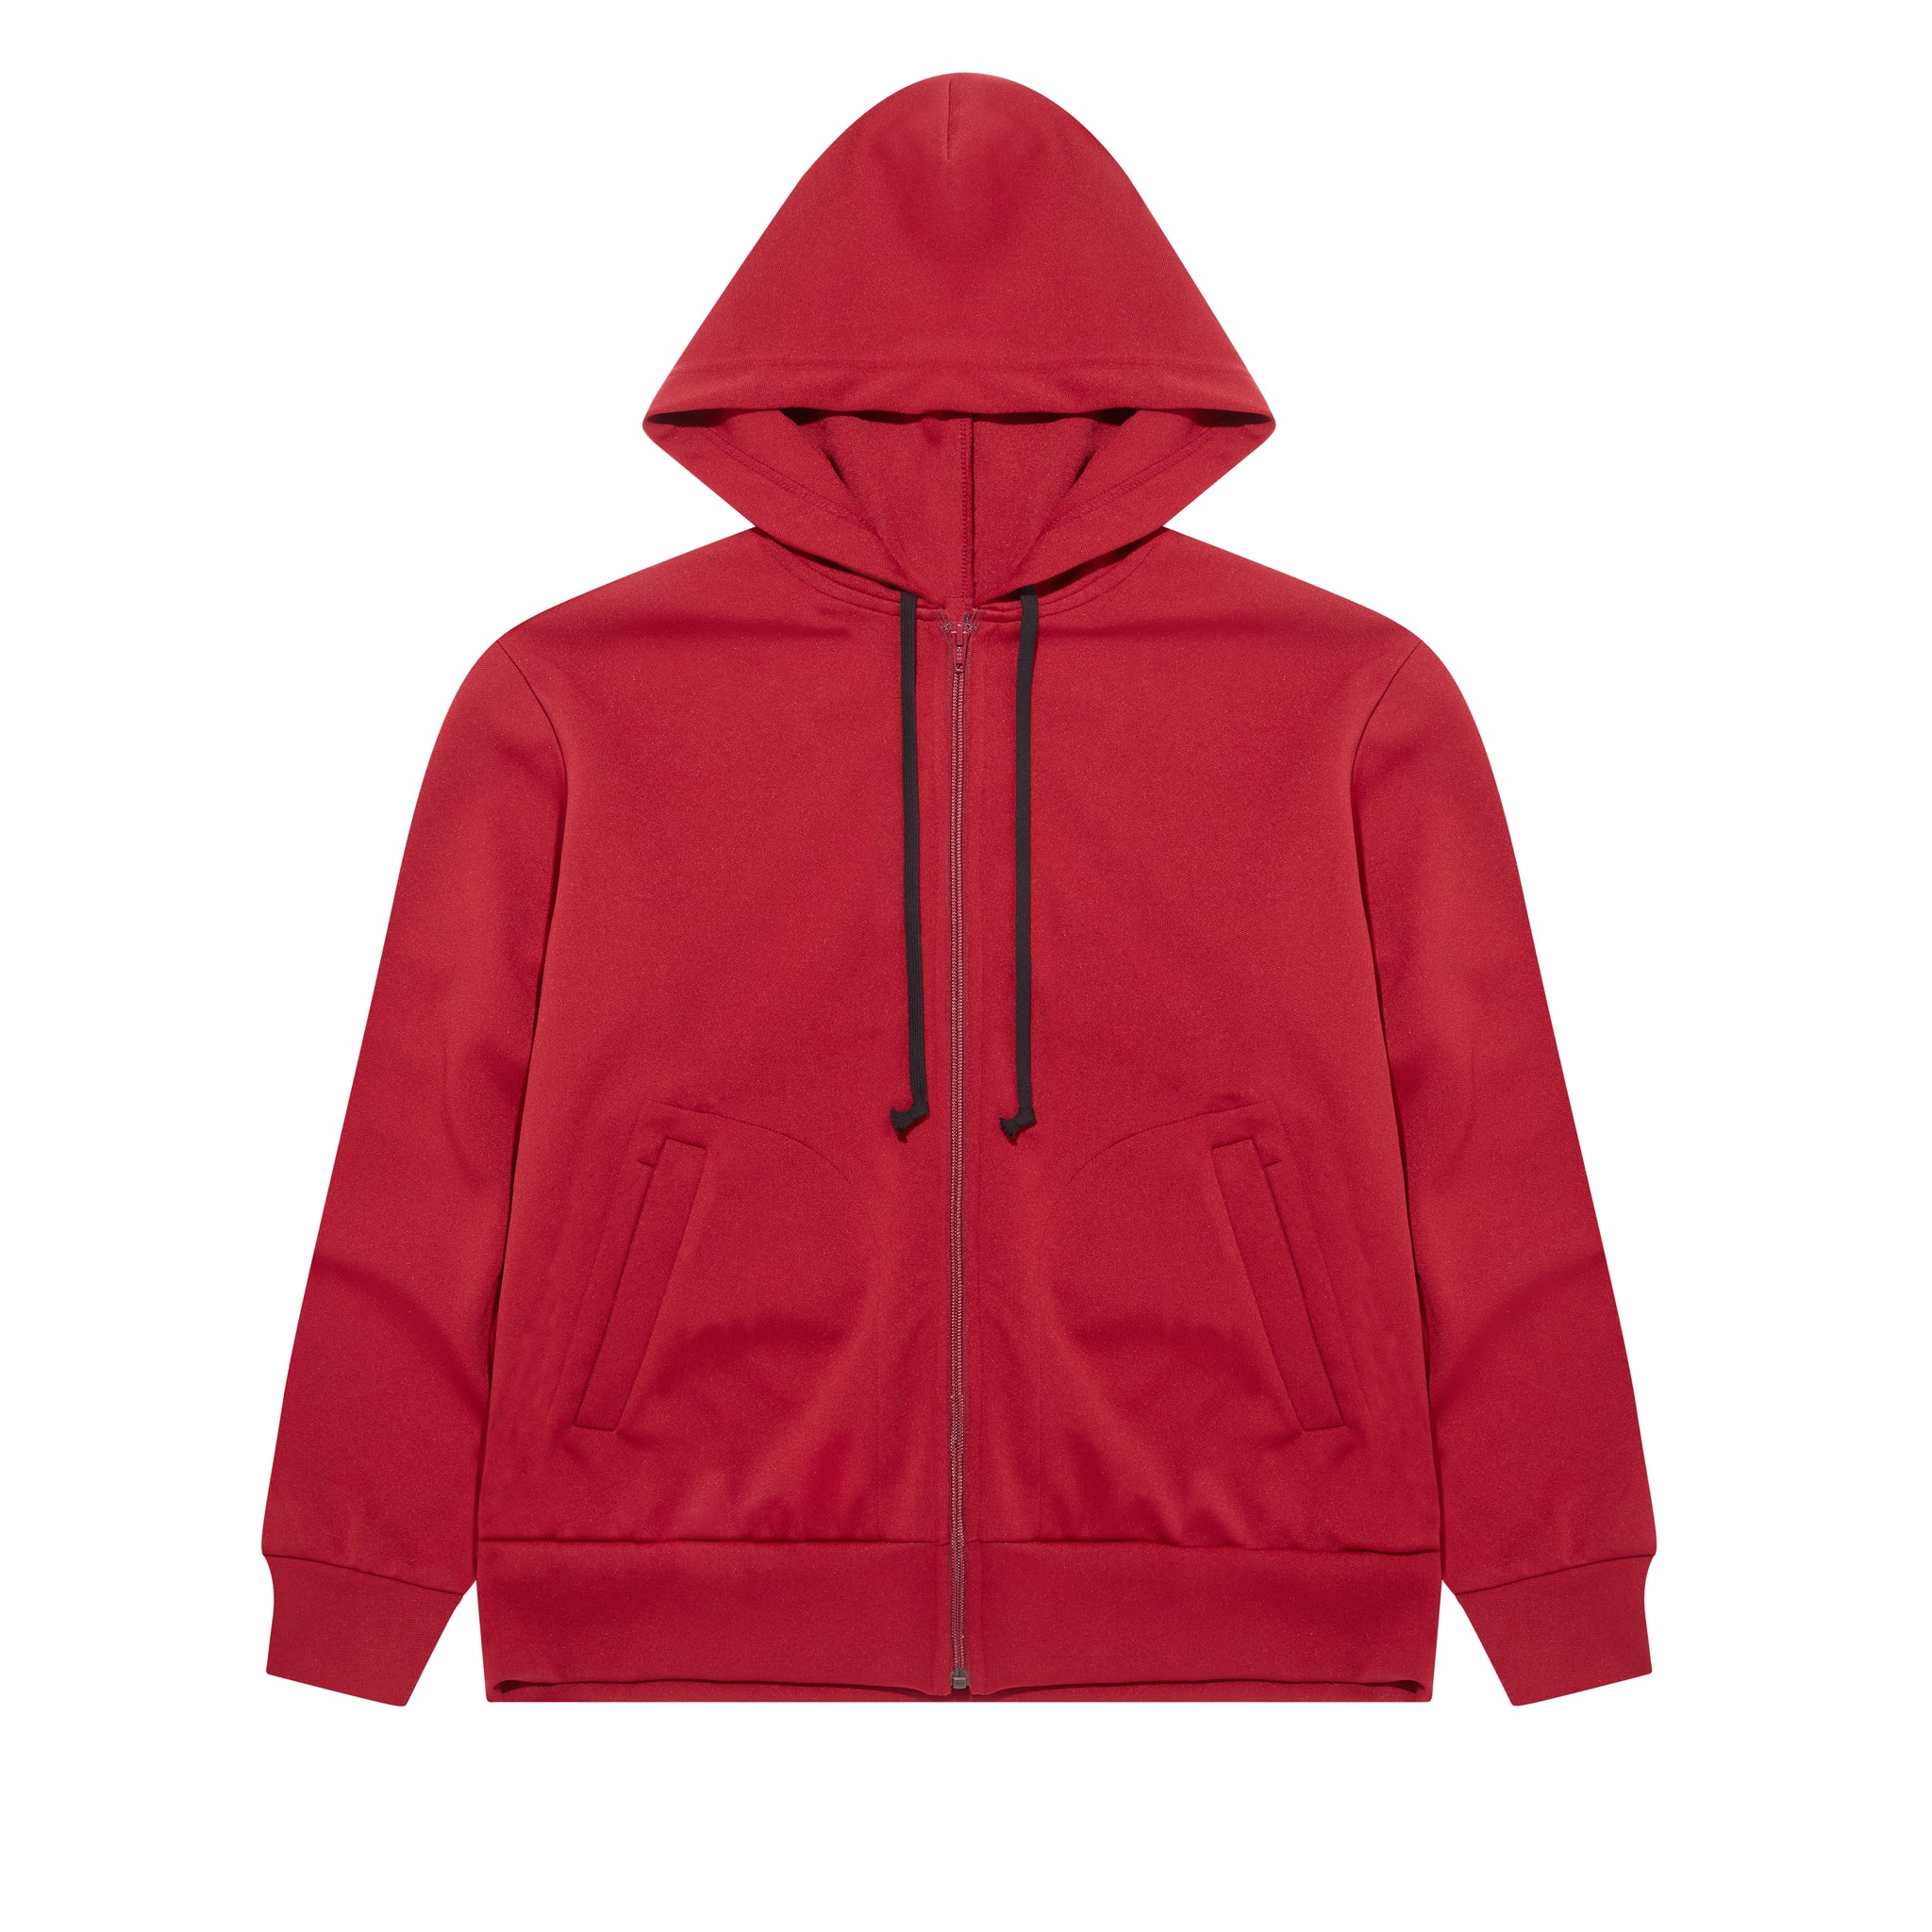 PLAY Zip Hooded Sweatshirt with Red Invader Heart and Blue Emblem (Burgundy)